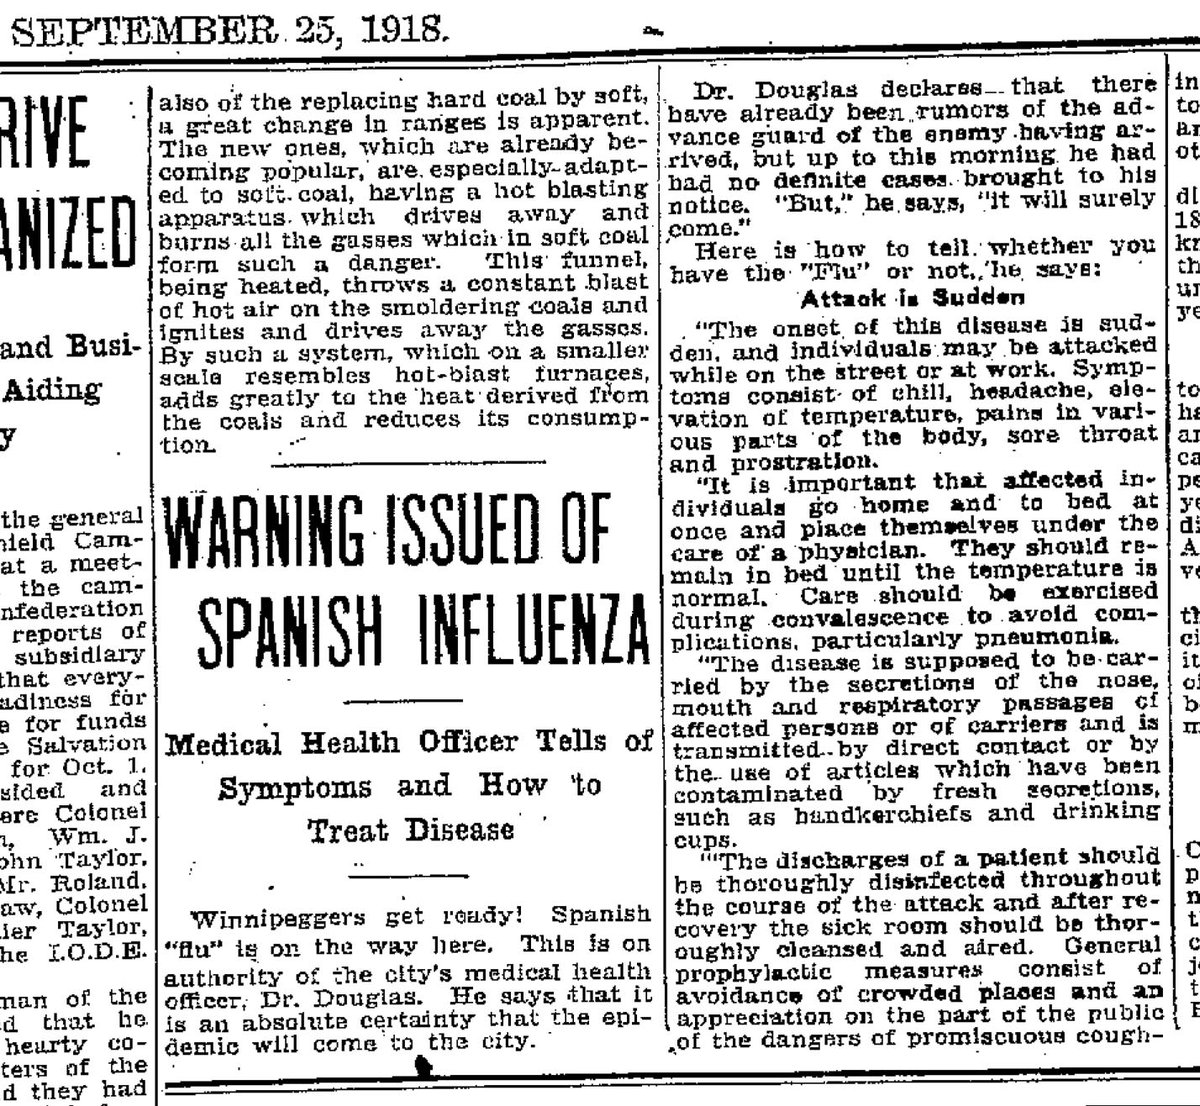 ‘Winnipeggers get ready!’ - By the last week of September 1918, a statement was issued by the medical health officer, warning that the pandemic was coming and explaining what could be expected.